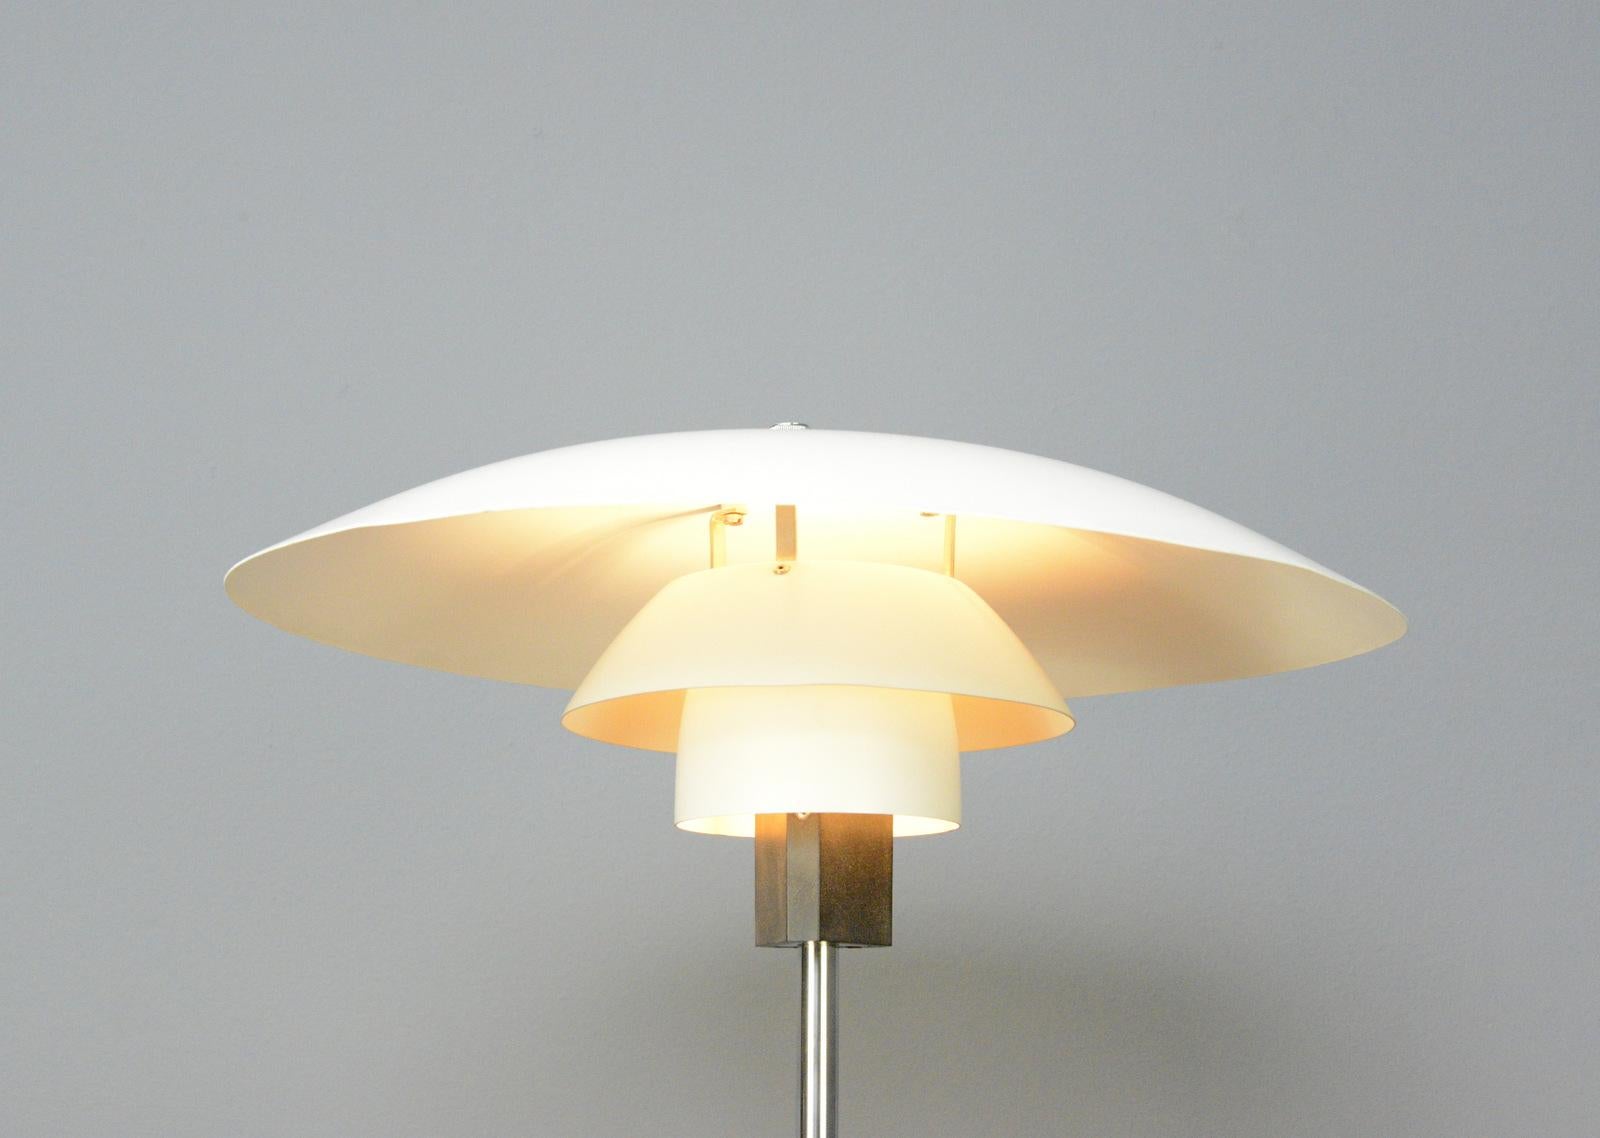 Model 4/3 Table Lamp By Louis Poulsen Circa 1960s

- Chromed steel base and stem
- On/Off switch on the base
- Stepped steel shade
- Takes E27 fitting bulbs
- Designed by Poul Henningsen
- Produced by Louis Poulsen
- Danish ~ 1960s
- 45cm wide x